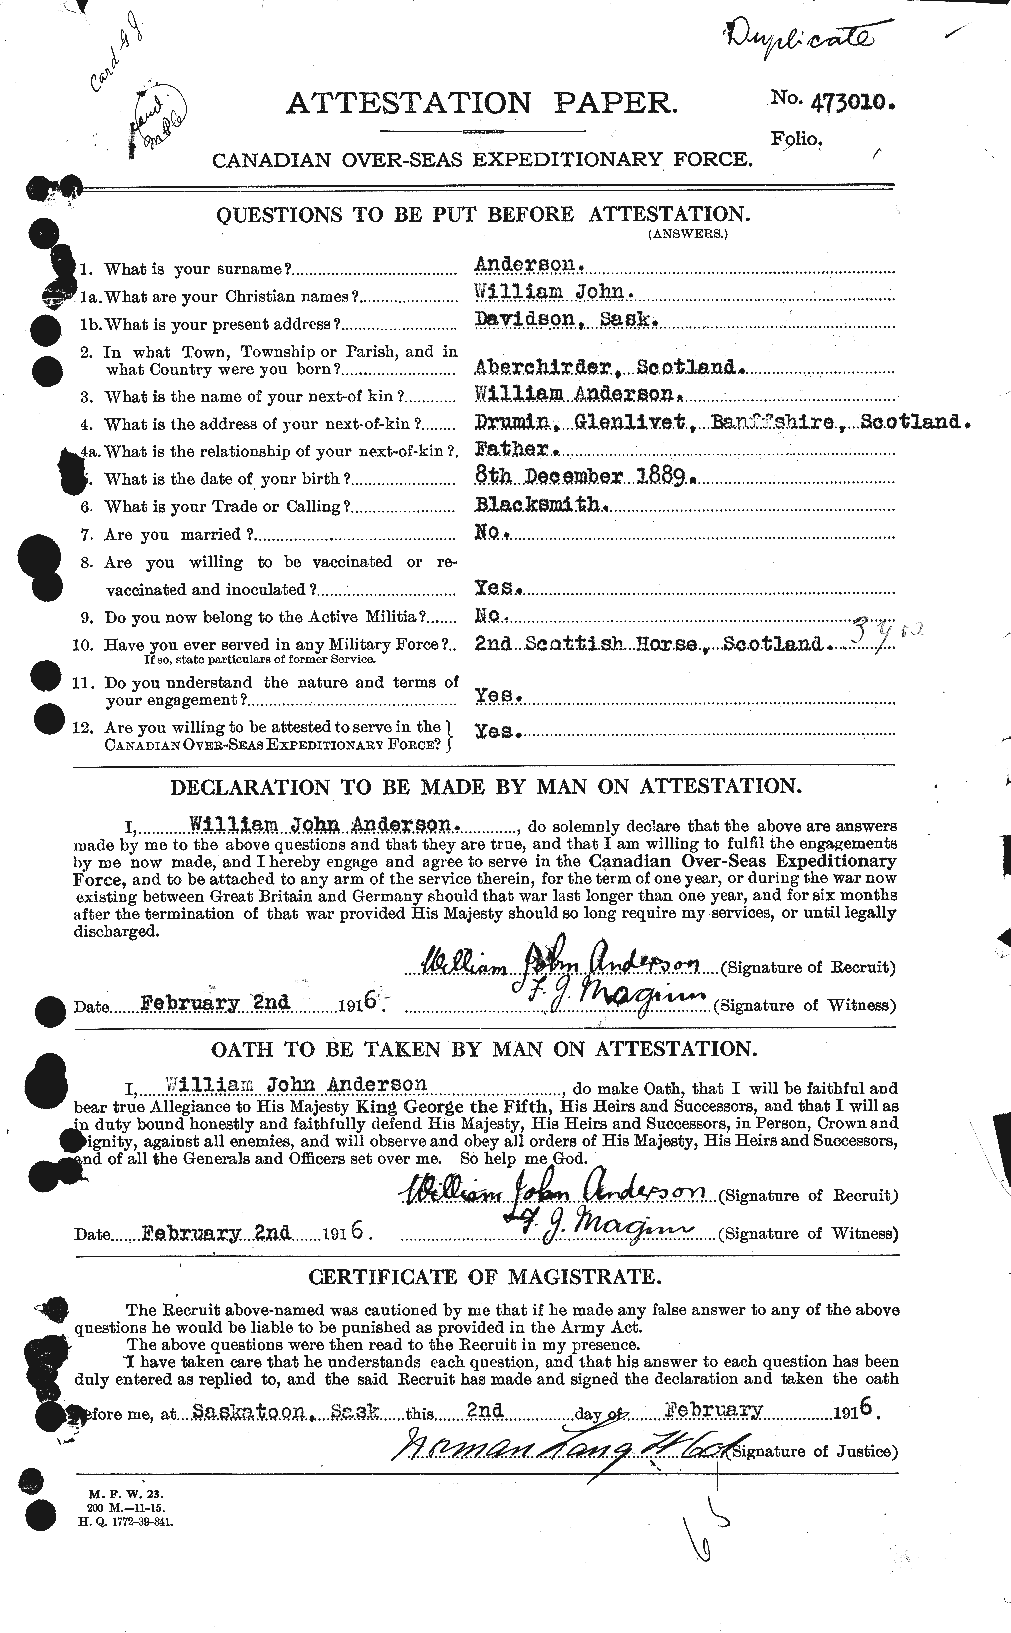 Personnel Records of the First World War - CEF 210816a